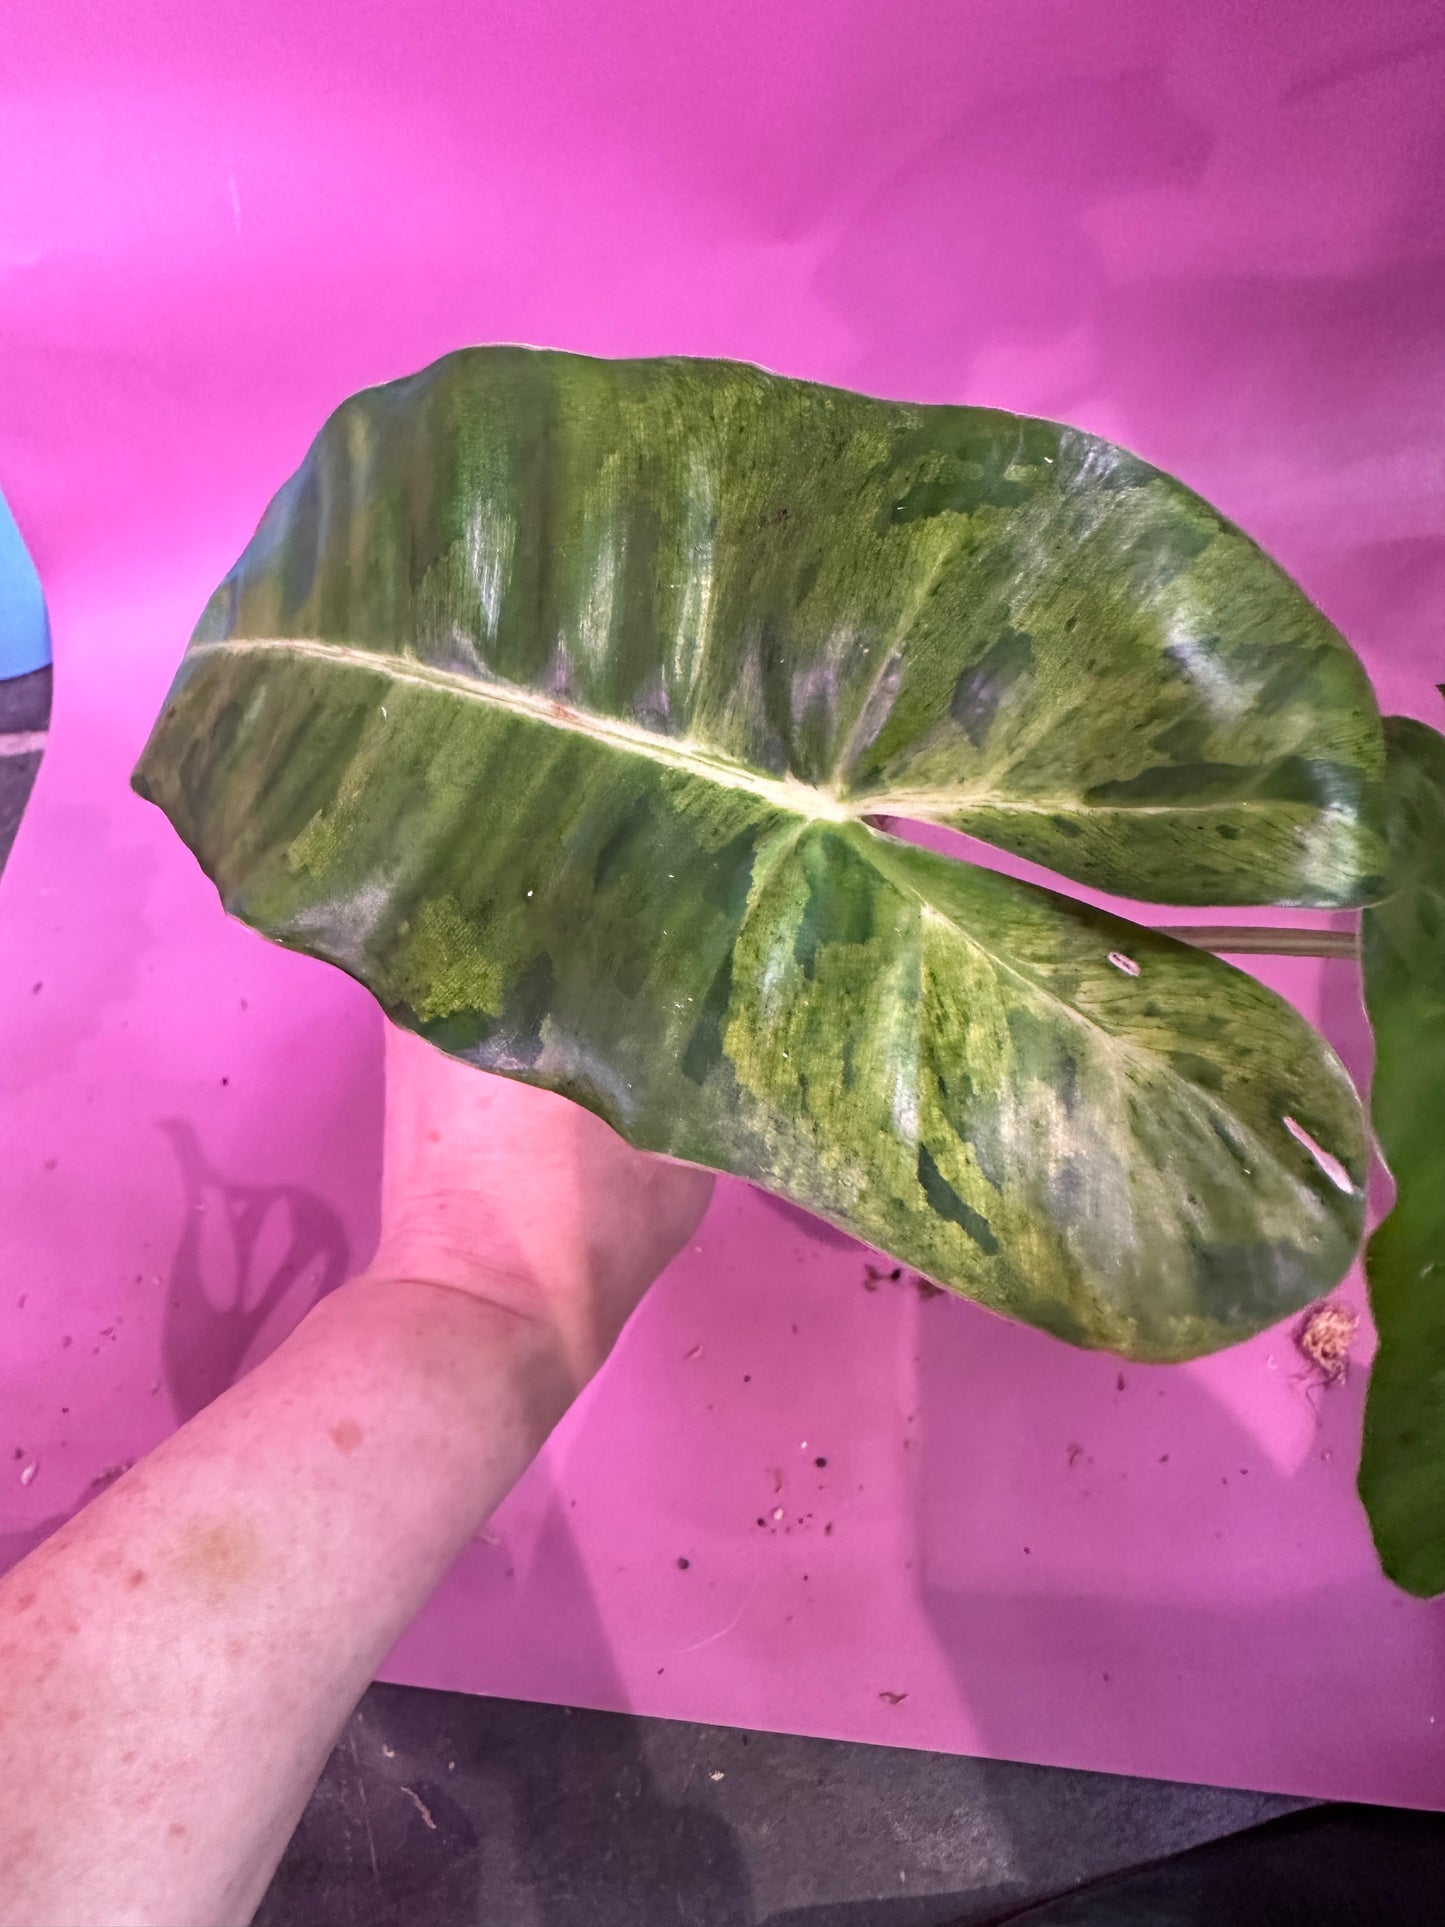 Mint variegated burle Marx philodendron